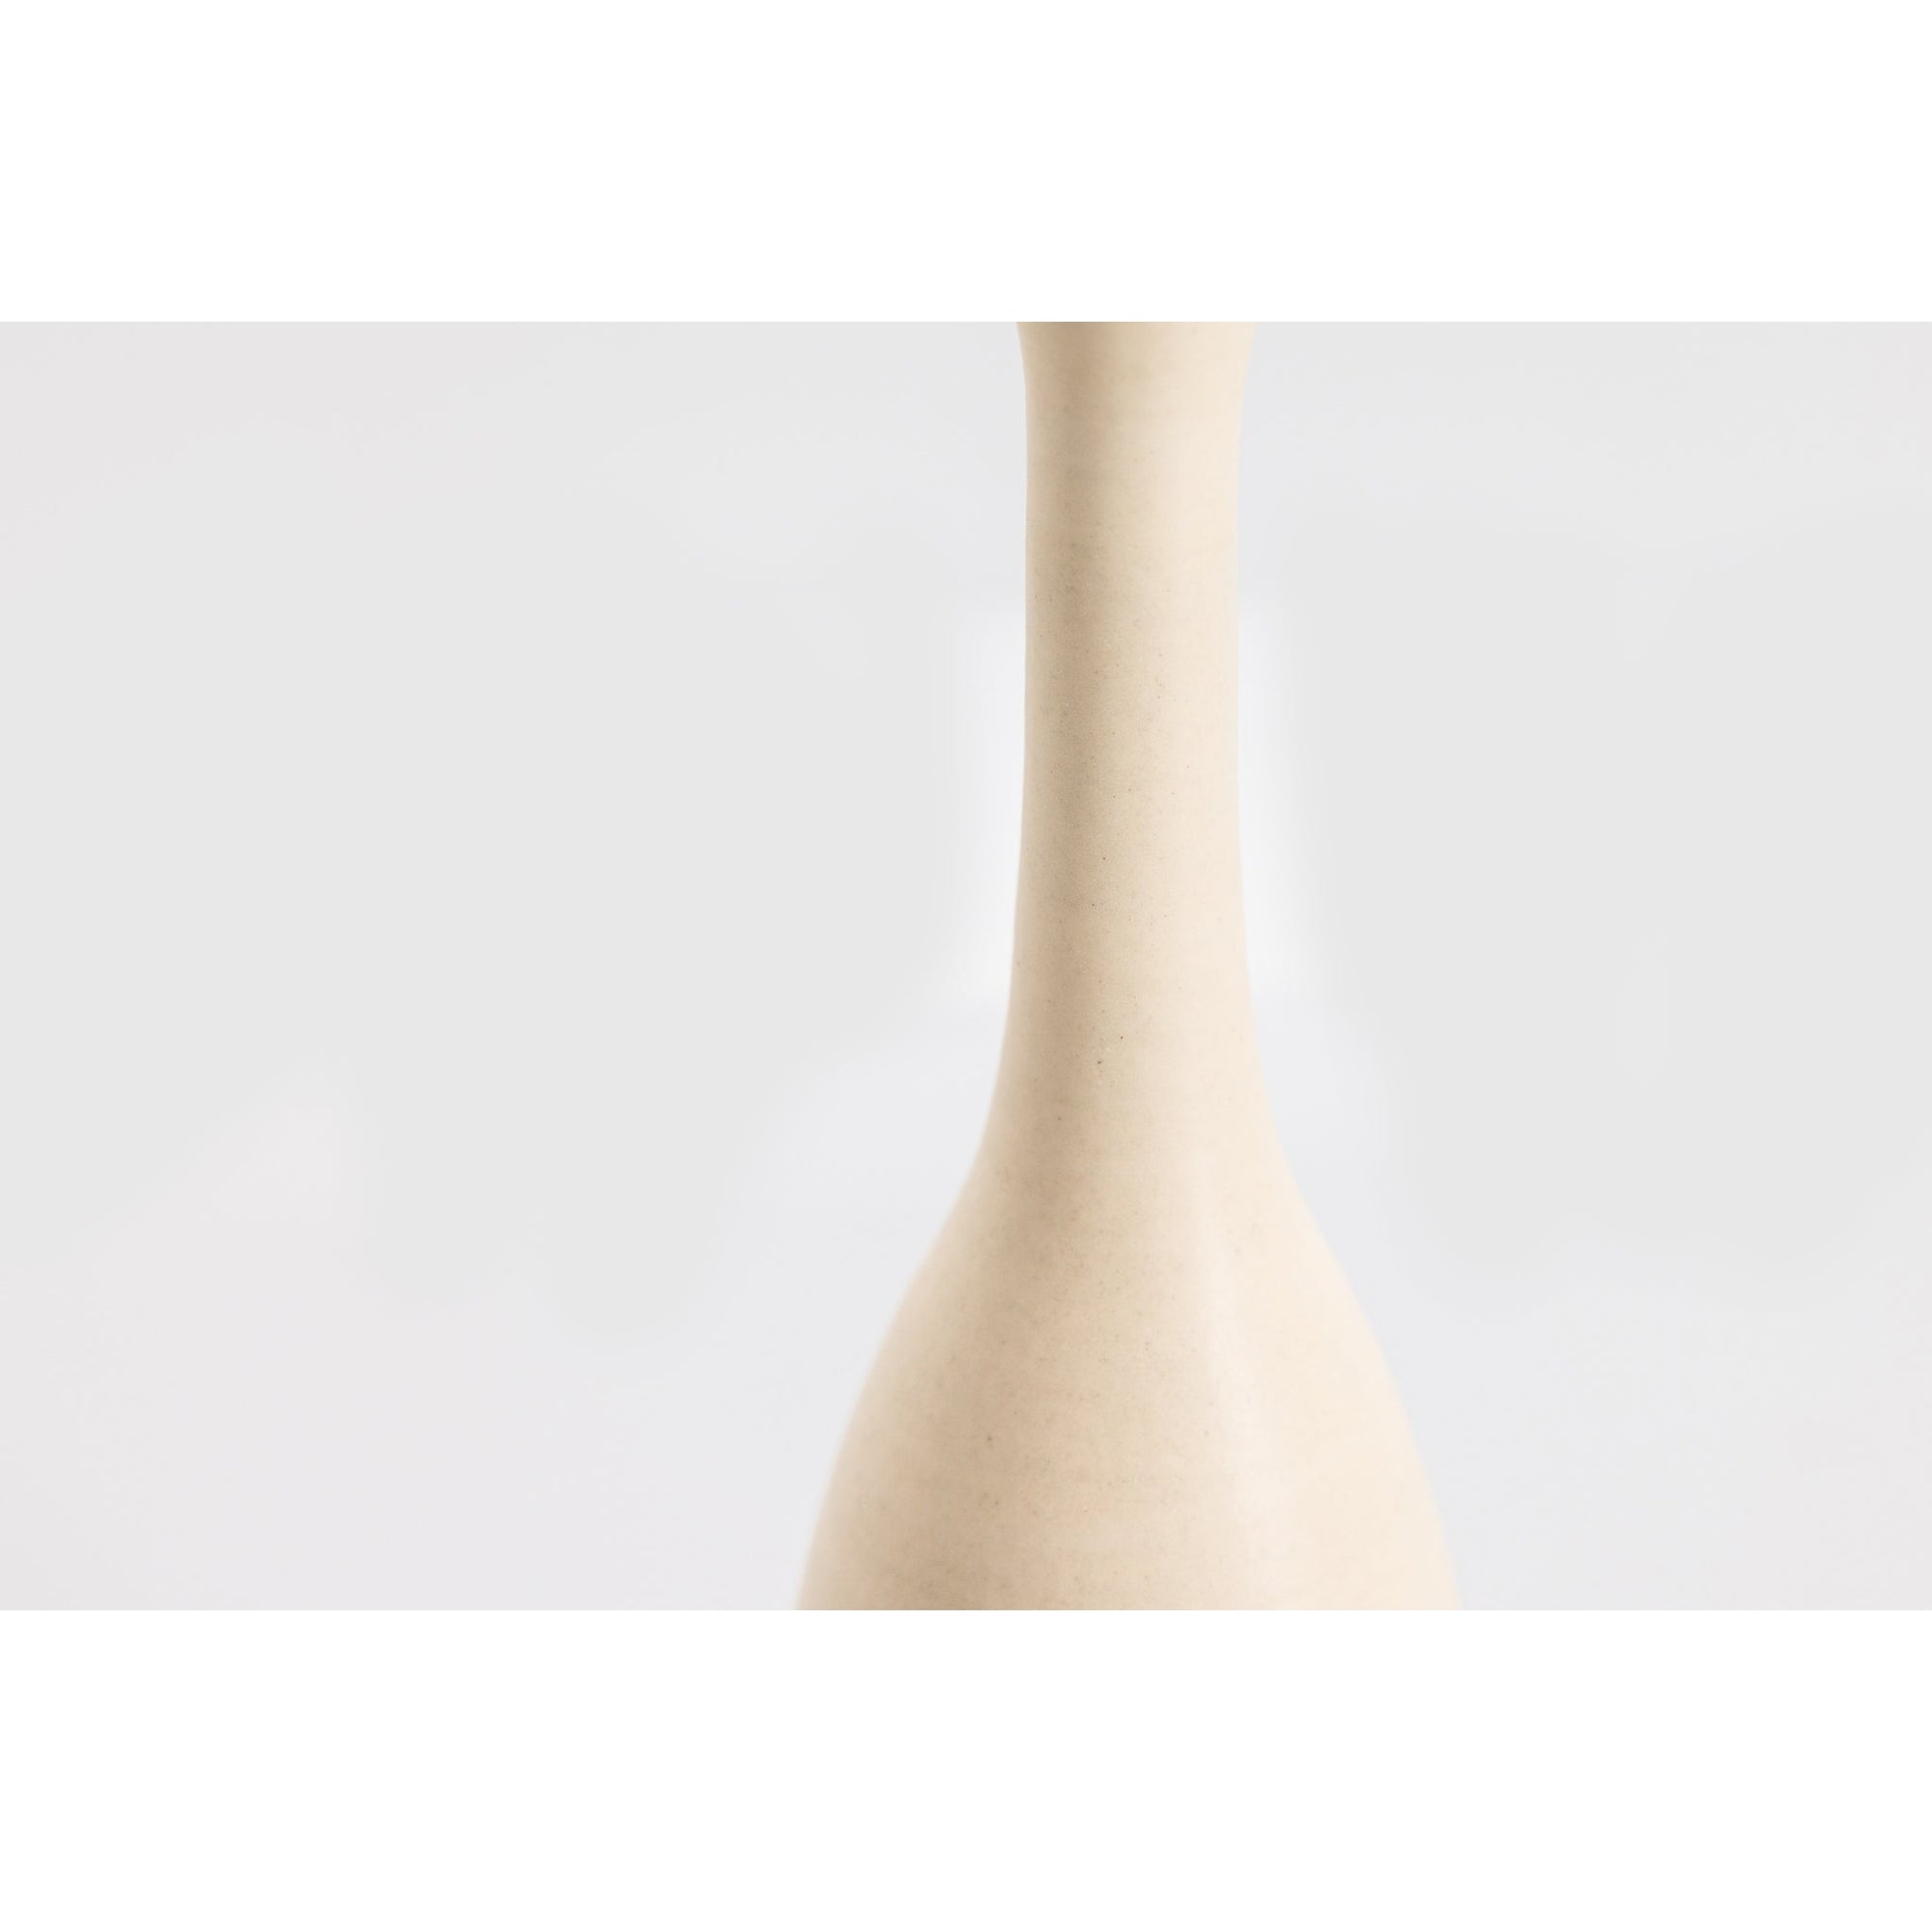 'LB140 Ivory Bottle' by Lucy Burley ceramics, available at Padstow Gallery, Cornwall